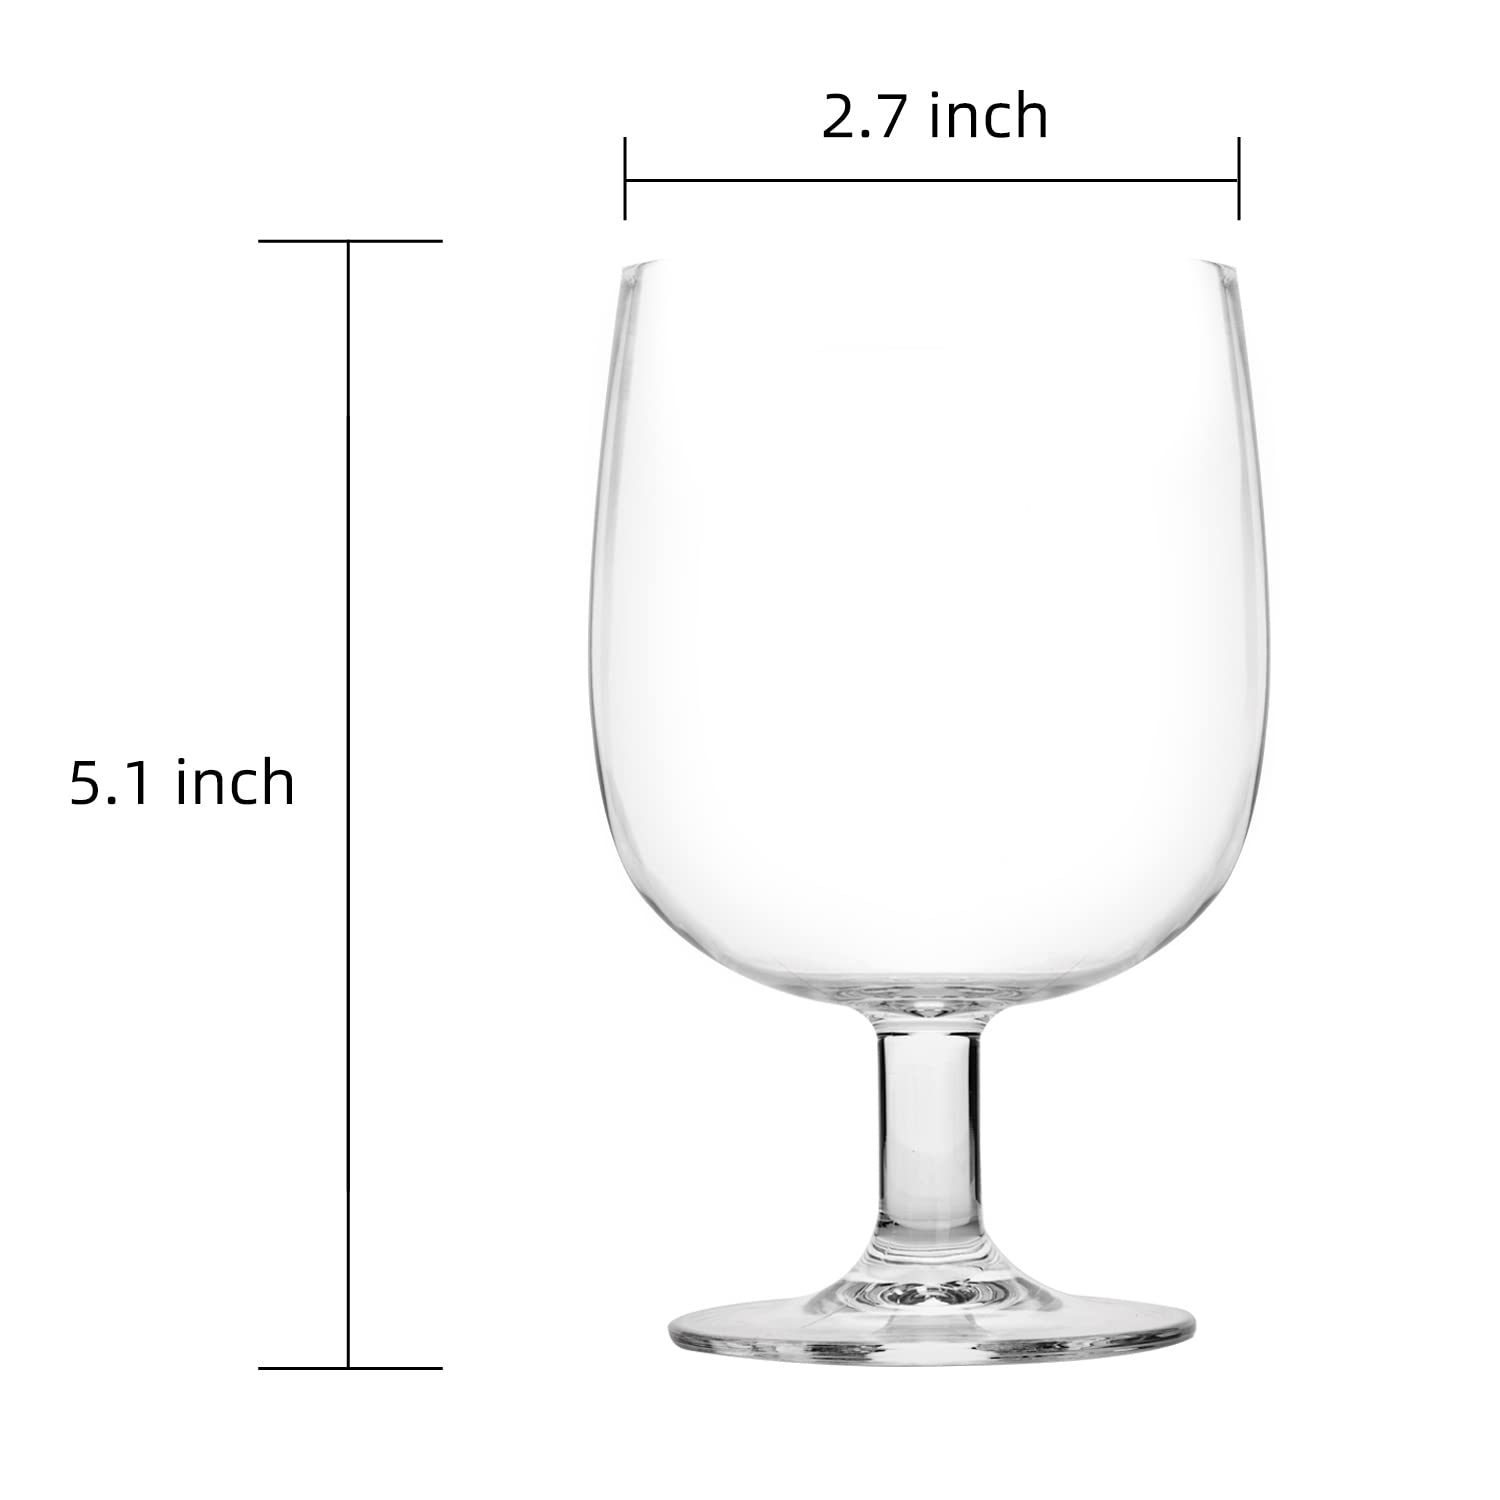 Unbreakable 9-ounce Acrylic Plastic Red Wine Glass - Shatterproof, Reusable, Dishwasher Safe Drink Glassware (Set of 4) (Clear, 8)